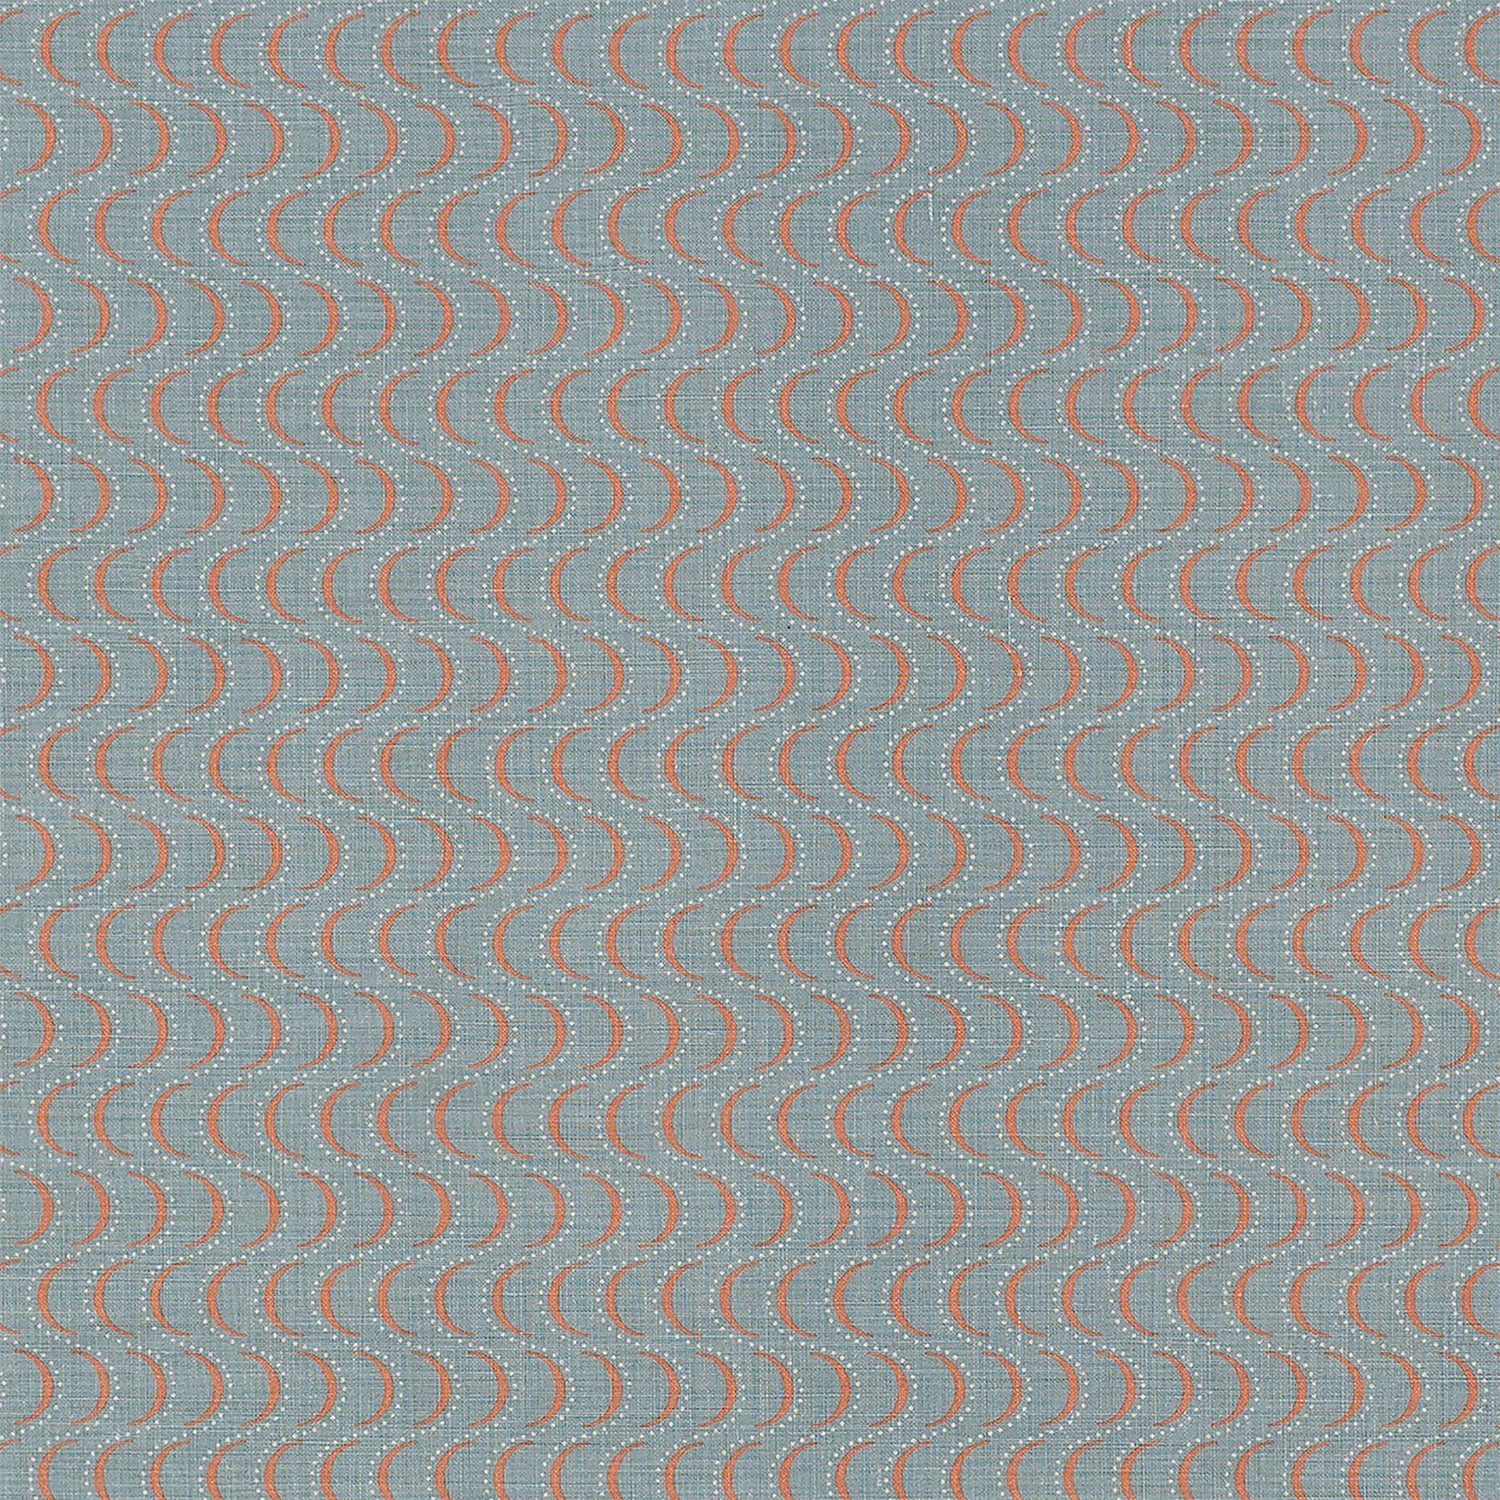 Fabric in an undulating stripe pattern in coral and white on a blue field.